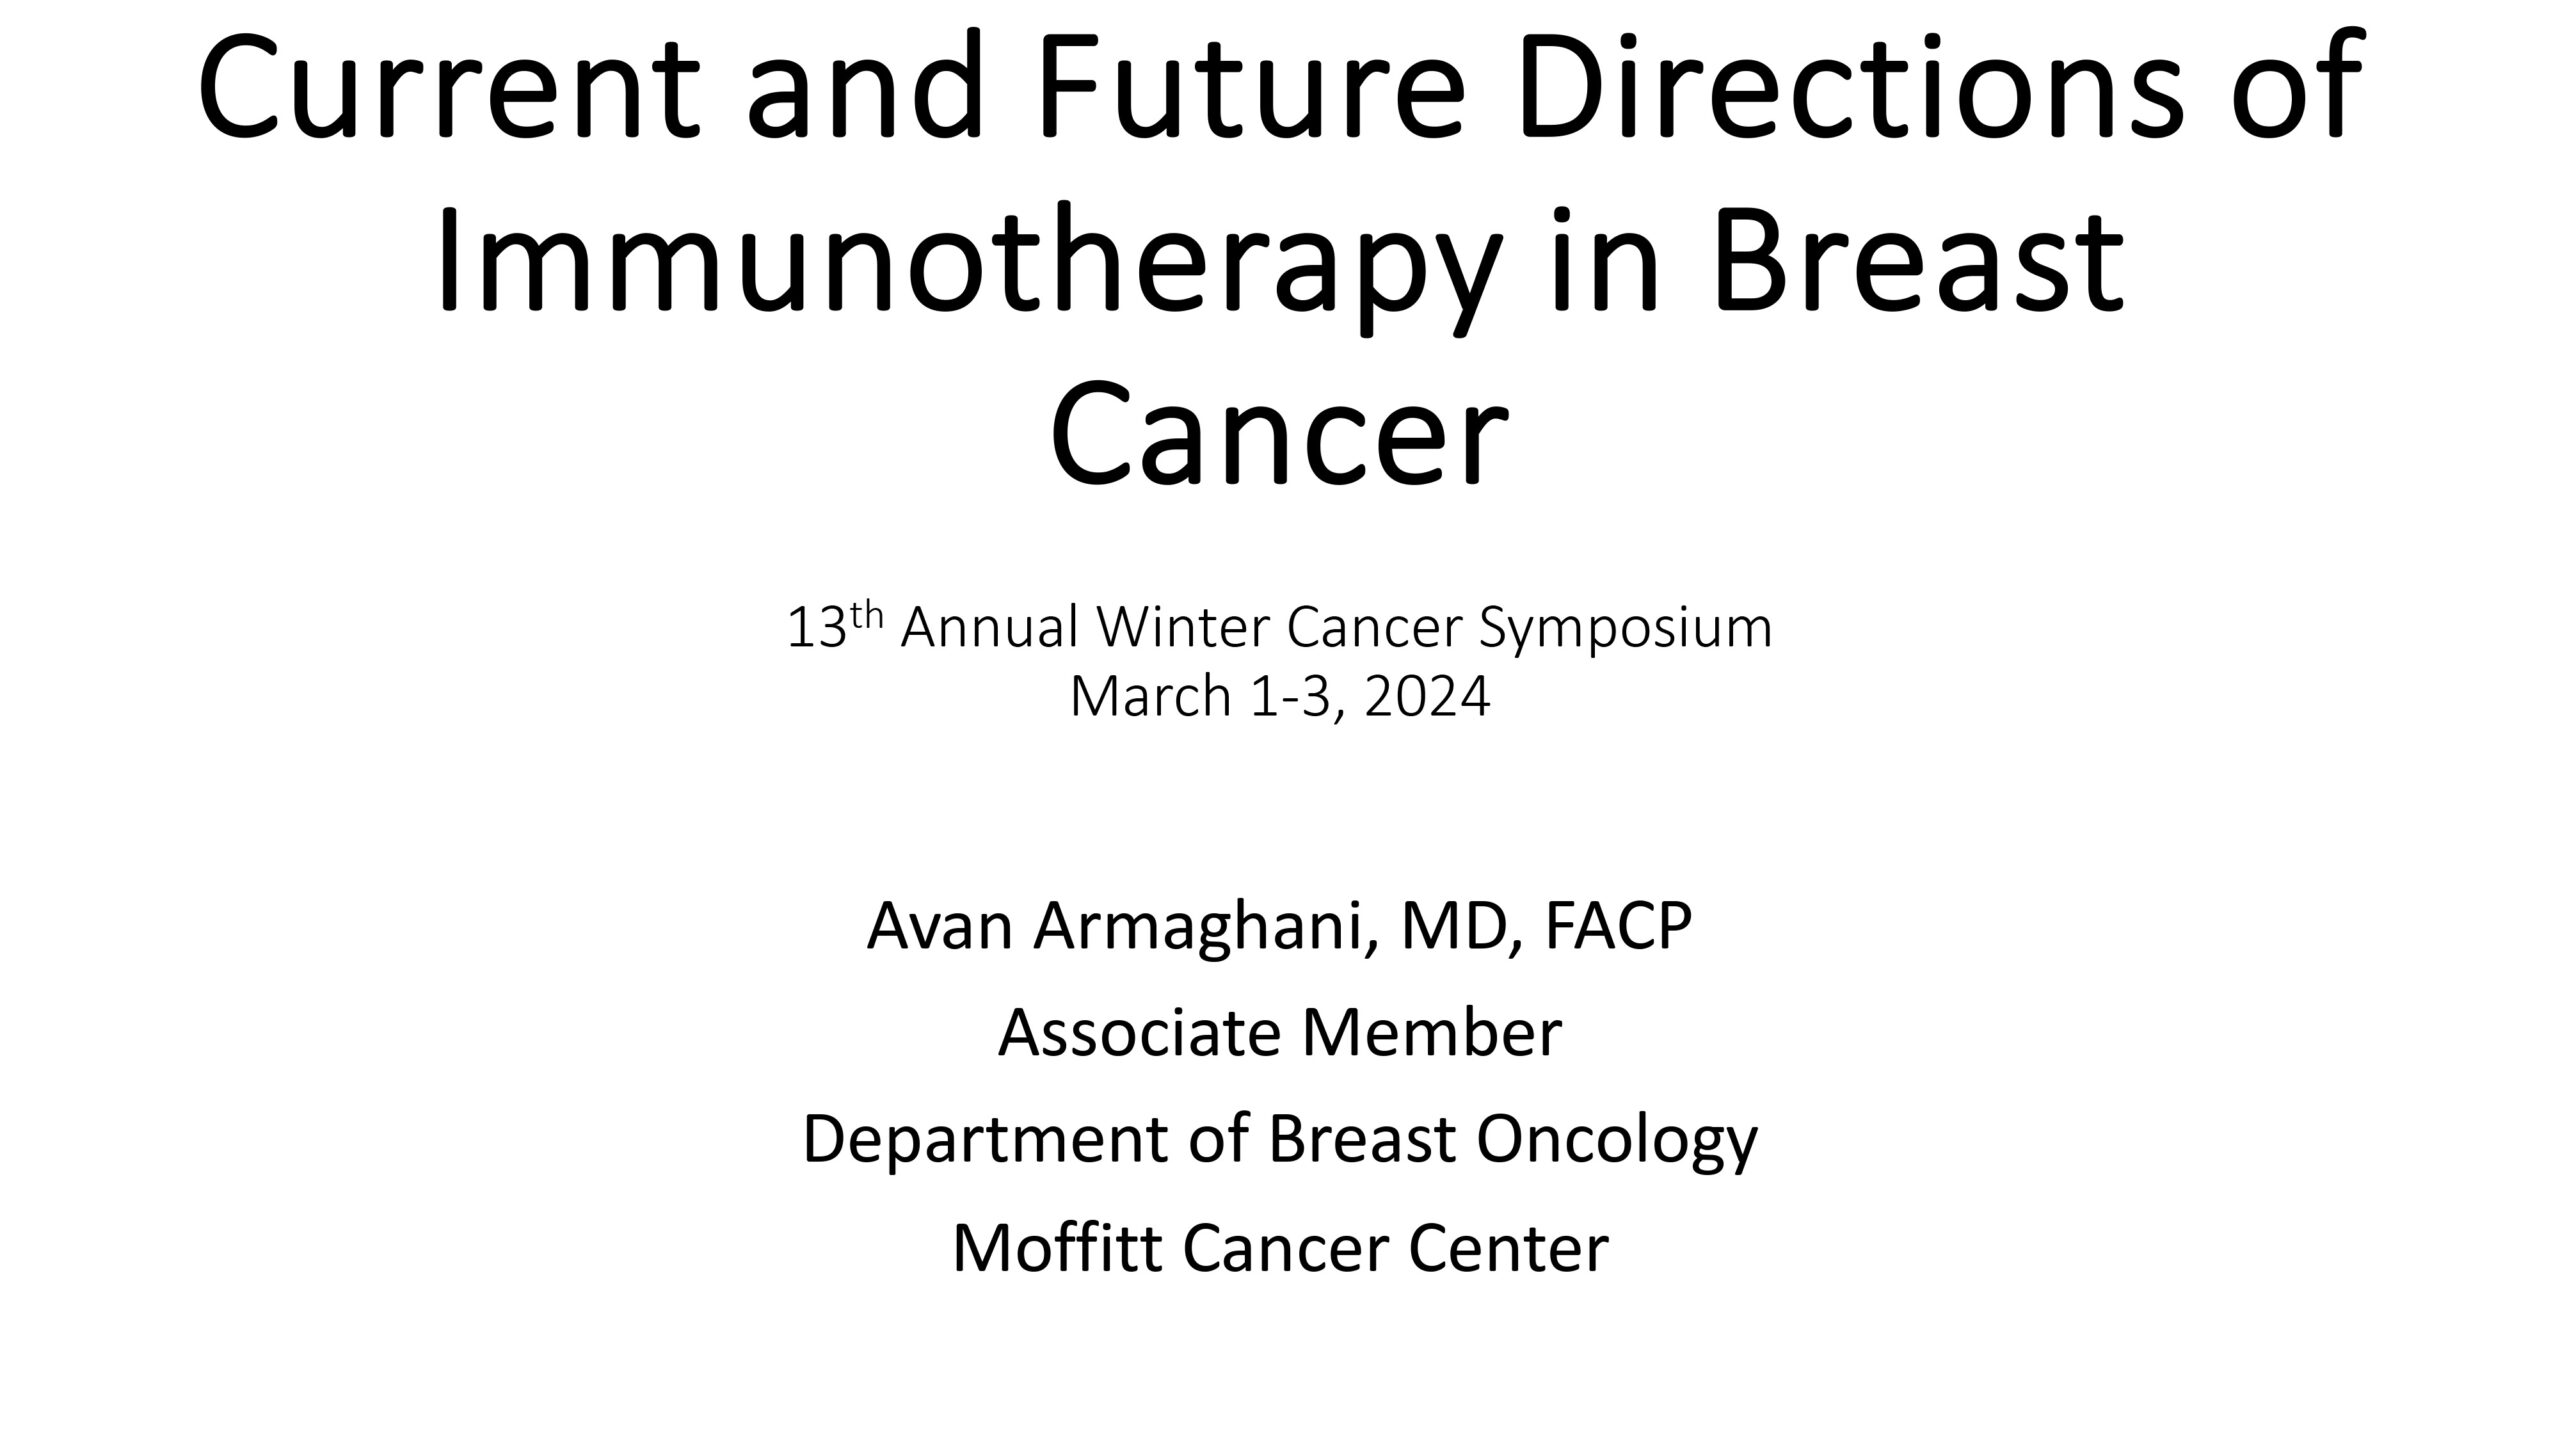 Current and Future Directions of Immunotherapy for Breast Cancer